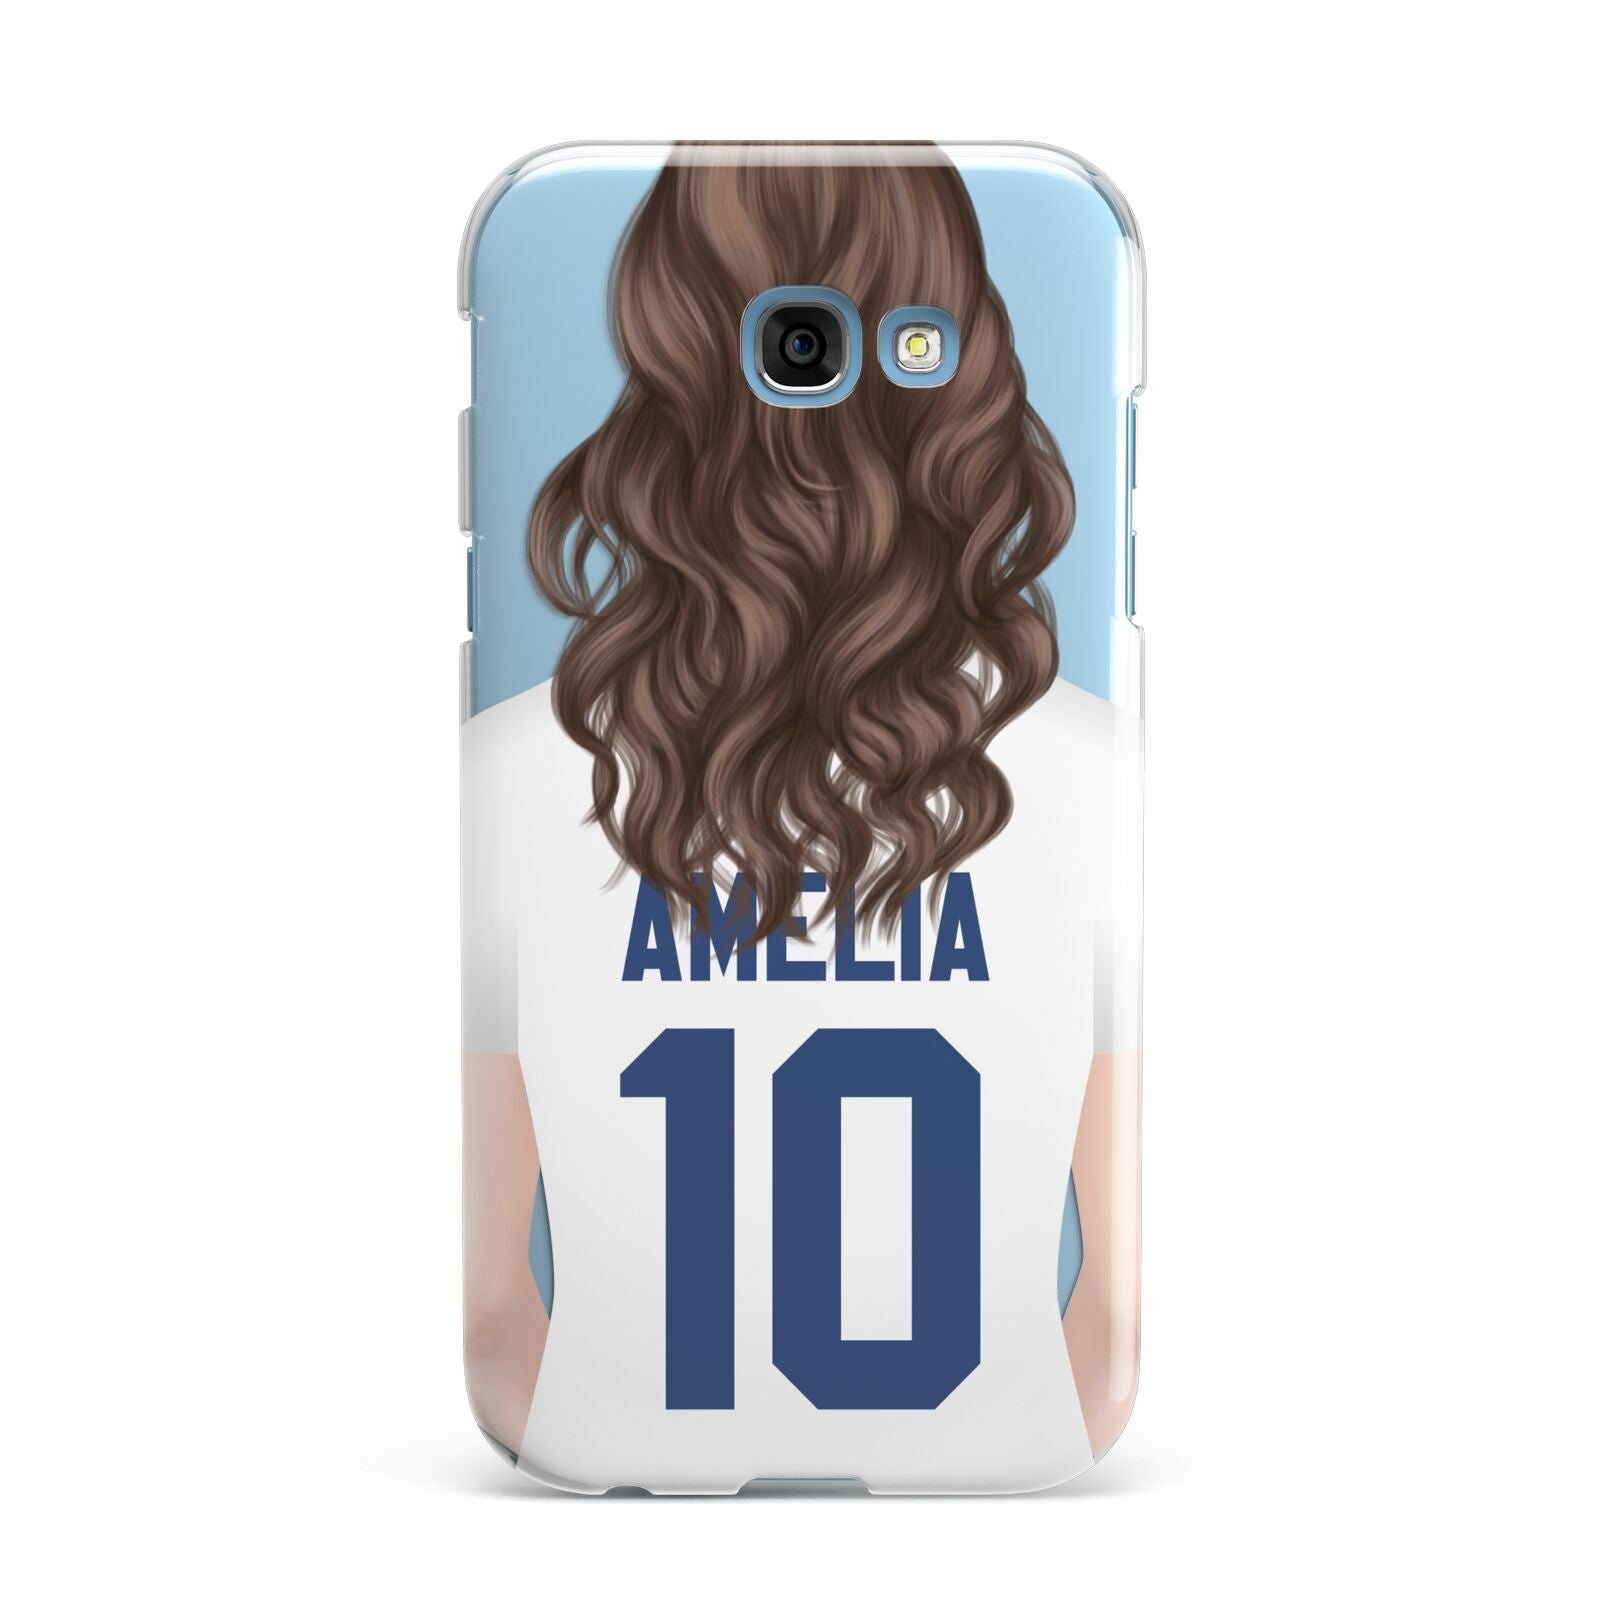 Womens Footballer Personalised Samsung Galaxy A7 2017 Case